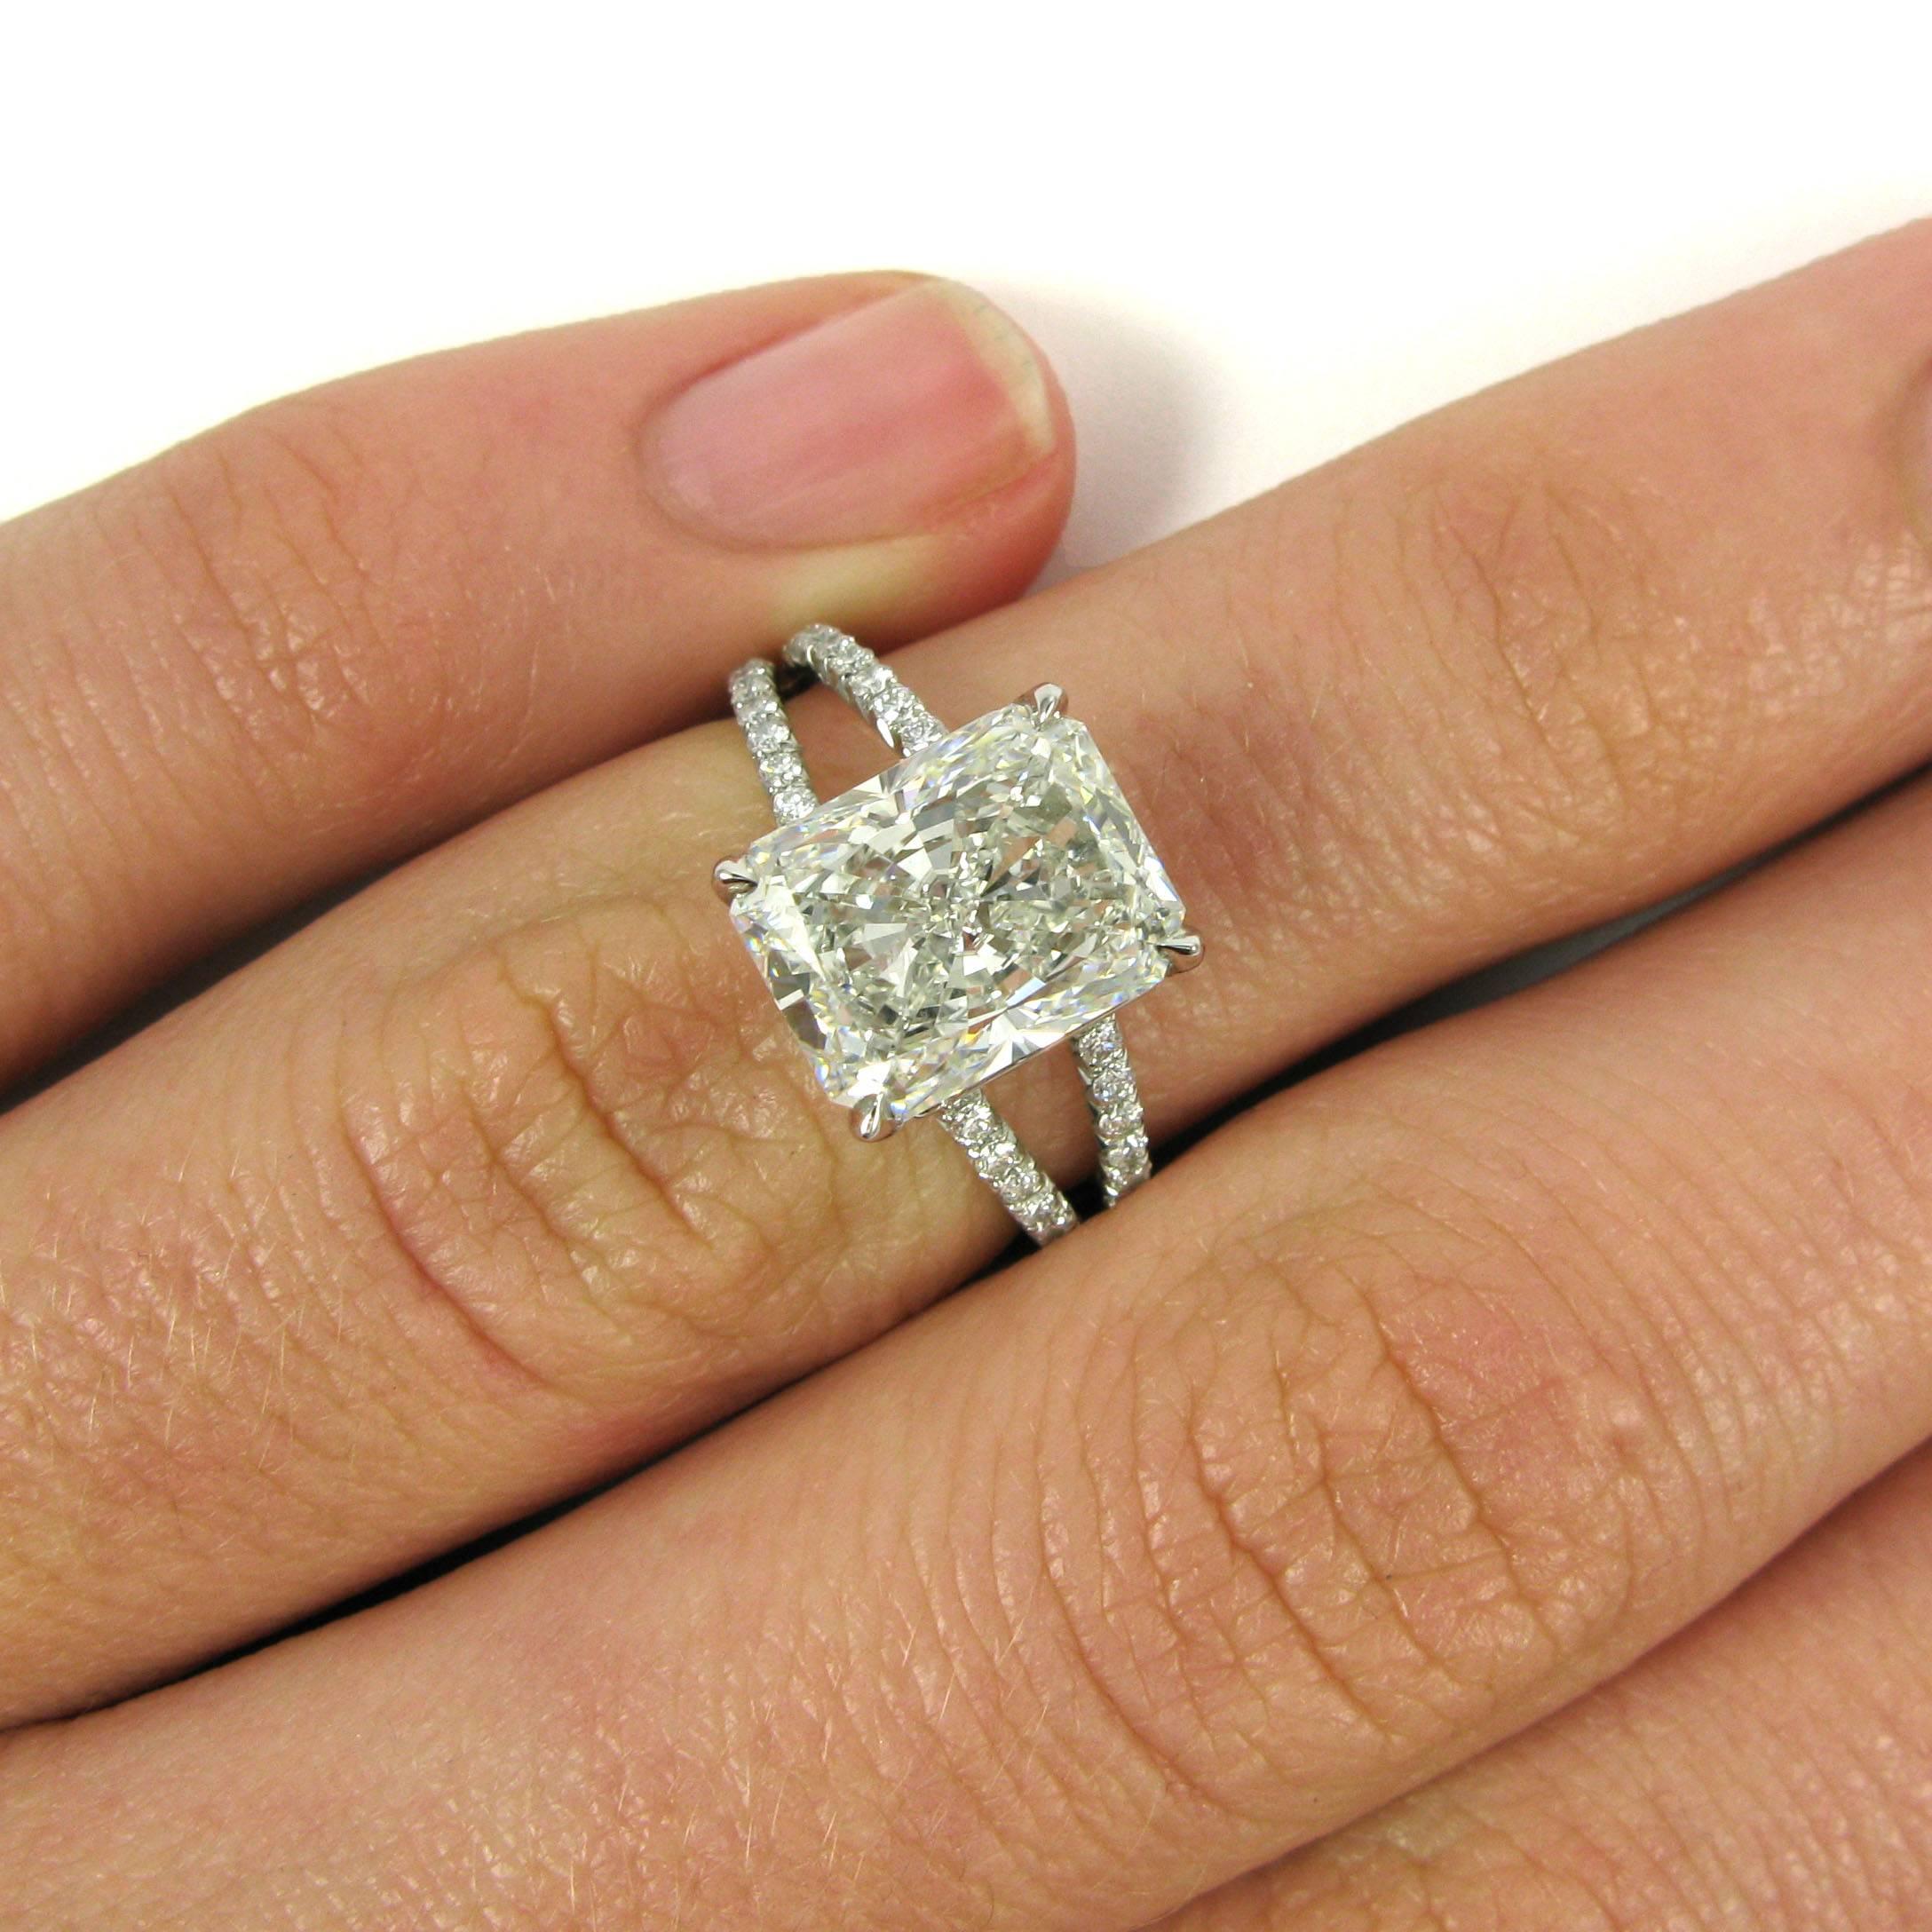 A 3.46 carat radiant cut diamond with H color and VS2 clarity is set in a basket setting atop a delicate platinum split shank ring. Mounting is pave-set with 60 round-cut diamonds totaling approx. 0.90 carats.

Purchase includes GIA Diamond Grading